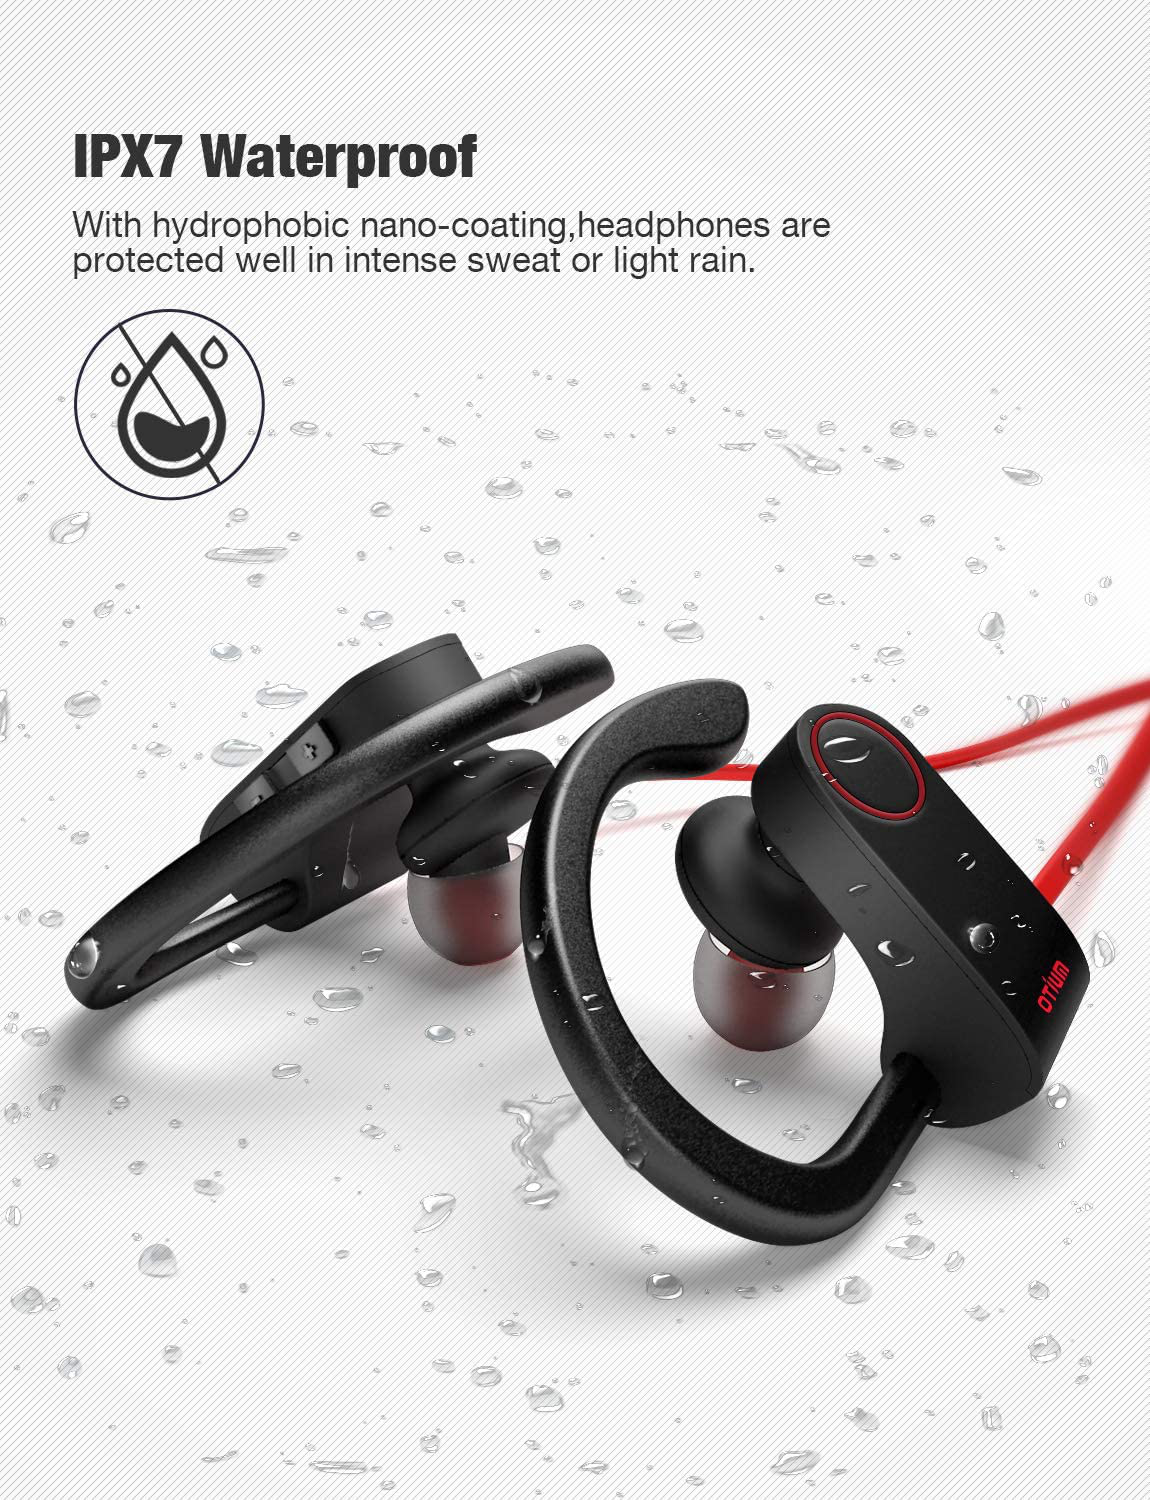 Otium Bluetooth Headphones,Wireless Earbuds IPX7 Waterproof Sports Earphones with Mic HD Stereo Sweatproof in-Ear Earbuds Gym Running Workout 8 Hour Battery Noise Cancelling Headsets